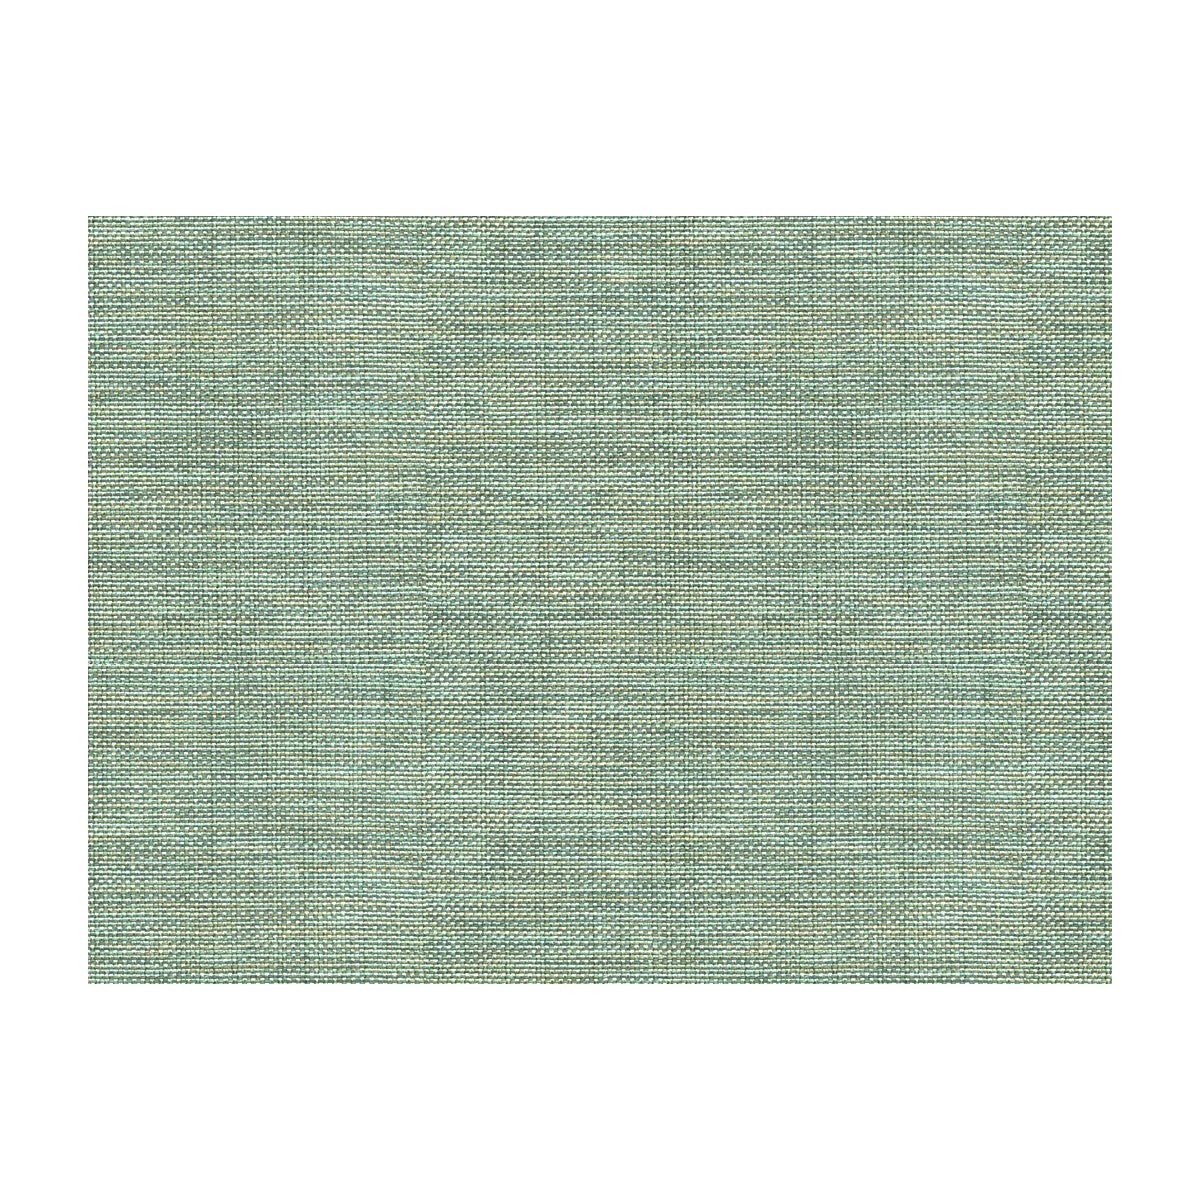 Kravet Basics fabric in 30299-1511 color - pattern 30299.1511.0 - by Kravet Basics in the Perfect Plains collection